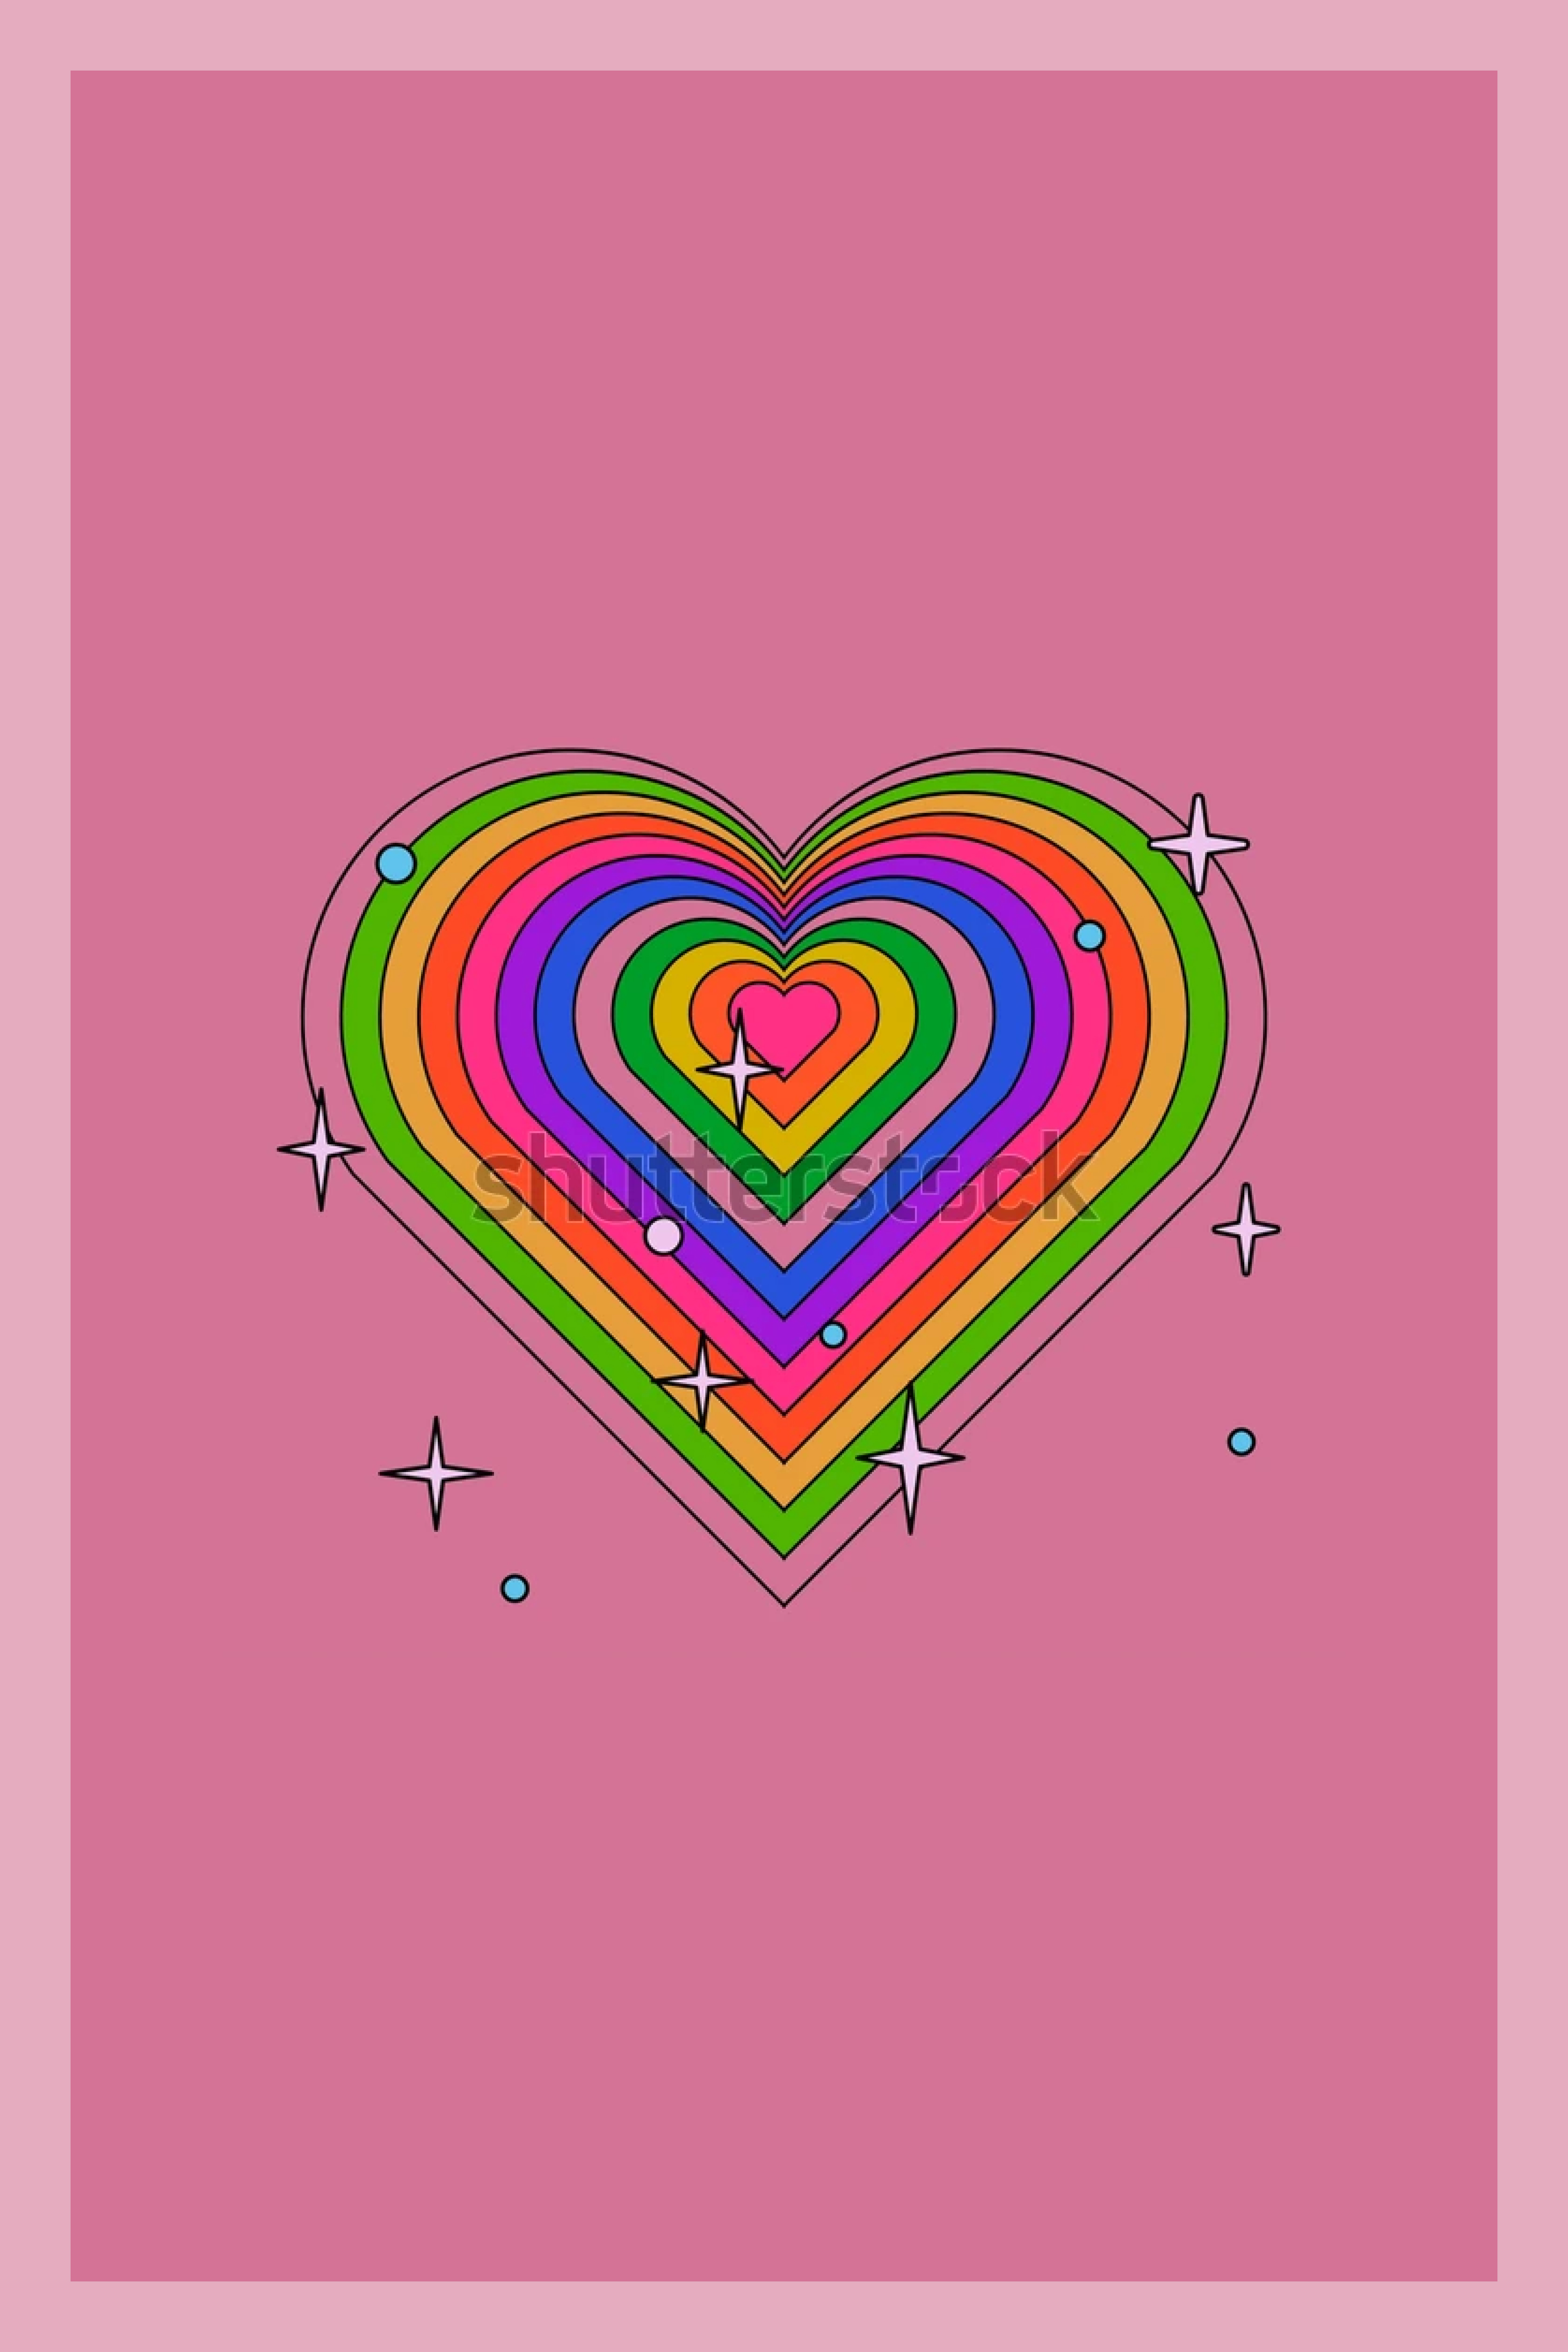 Heart in rainbow colors on a pink background.